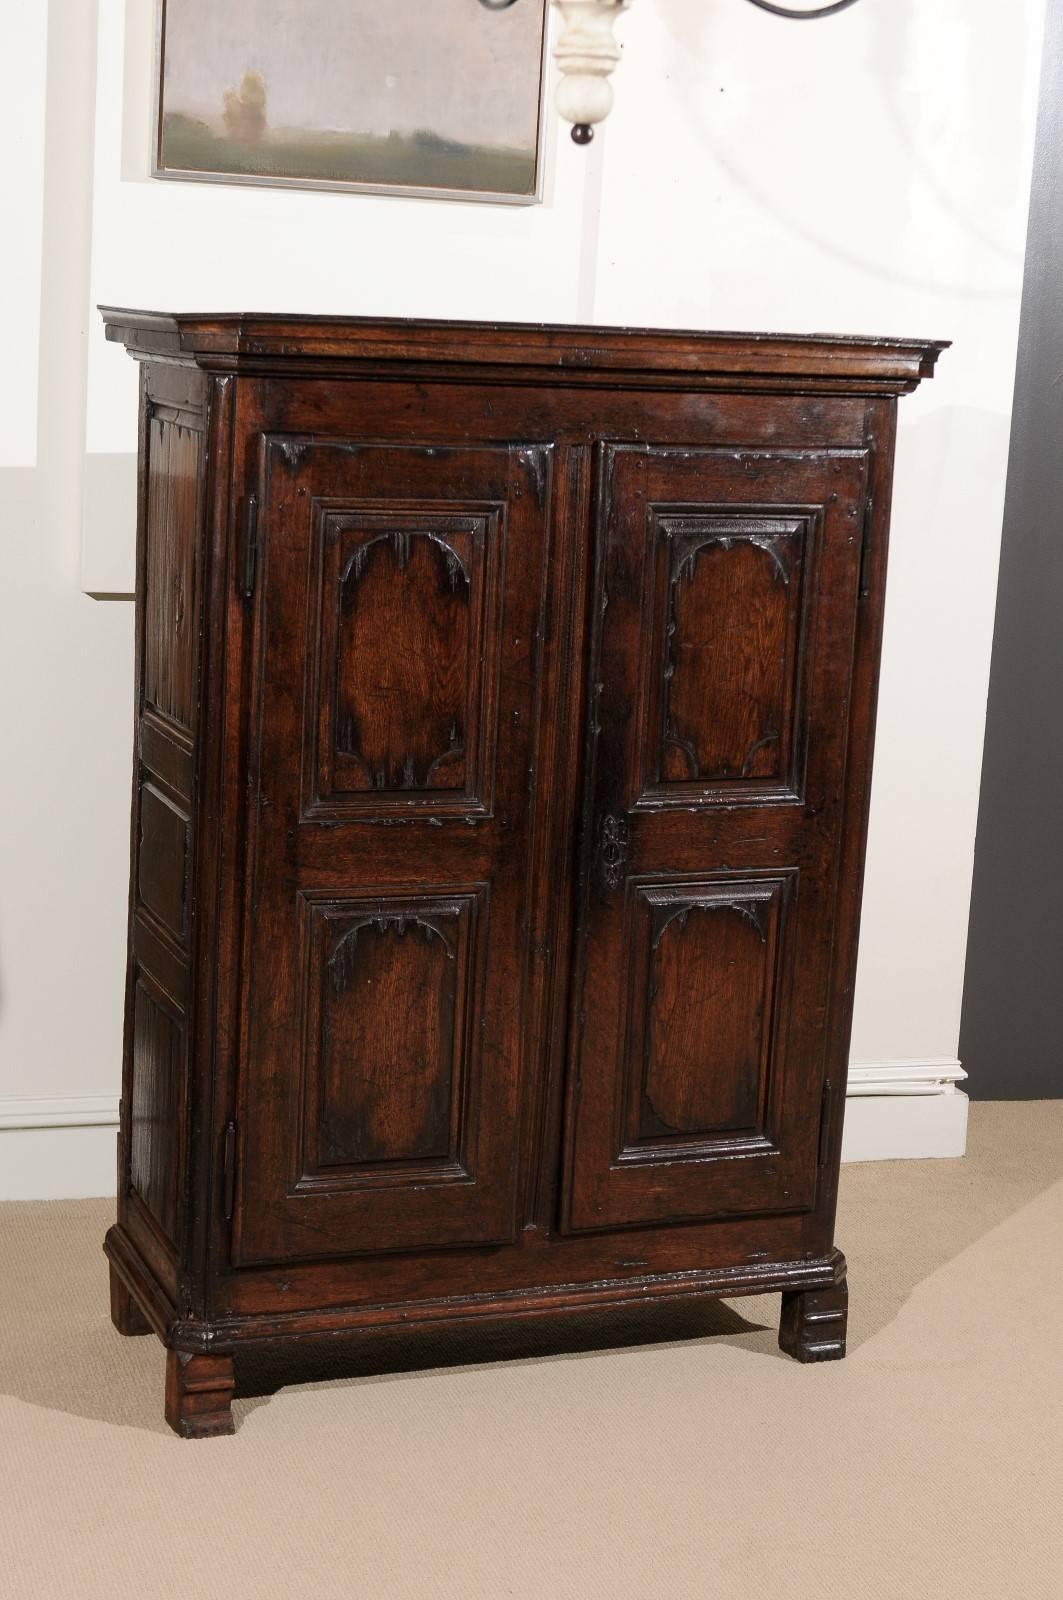 19th Century French Armoire in Oak, circa 1800 with Carved Doors and Two Interior Shelves For Sale